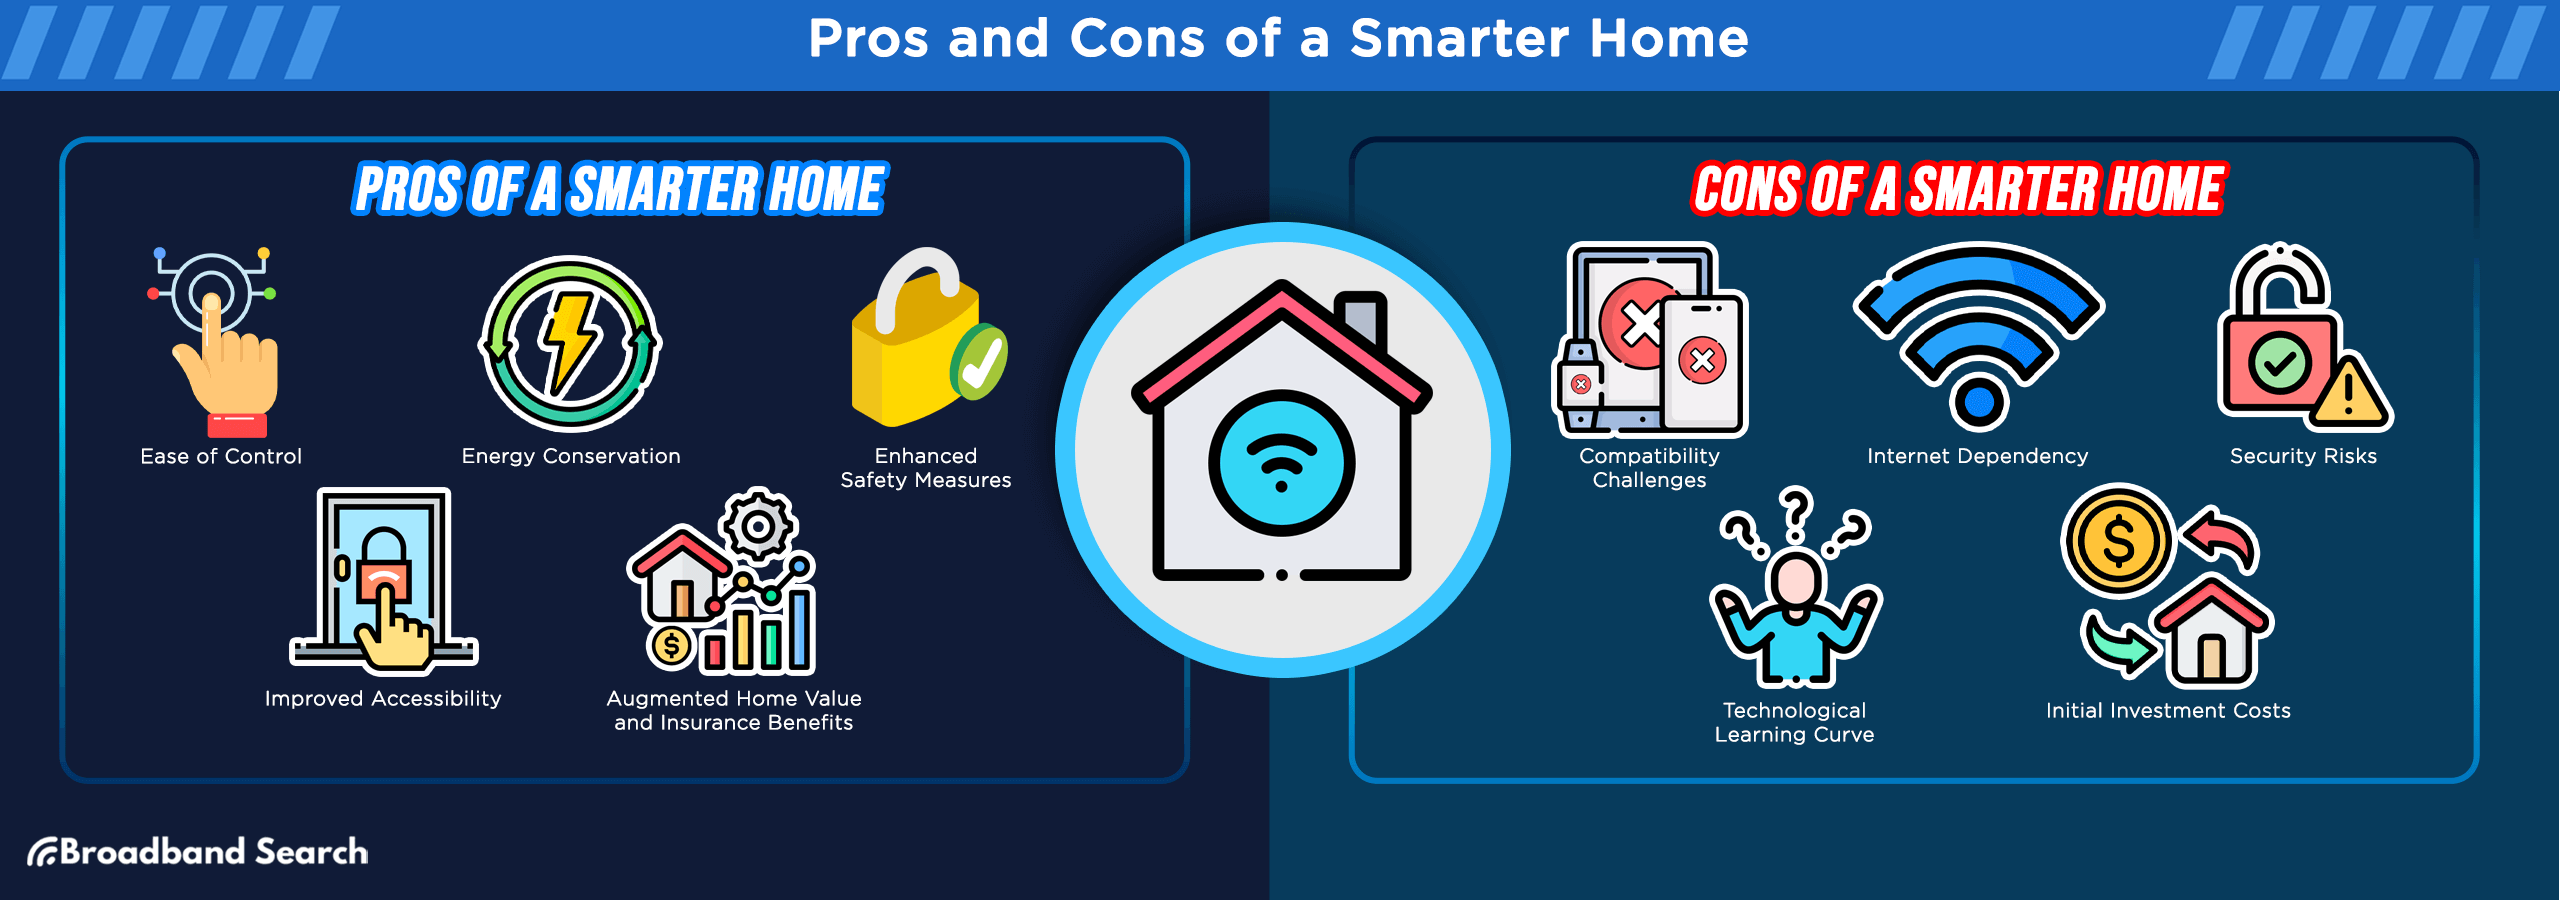 Pros and cons of a smarter home